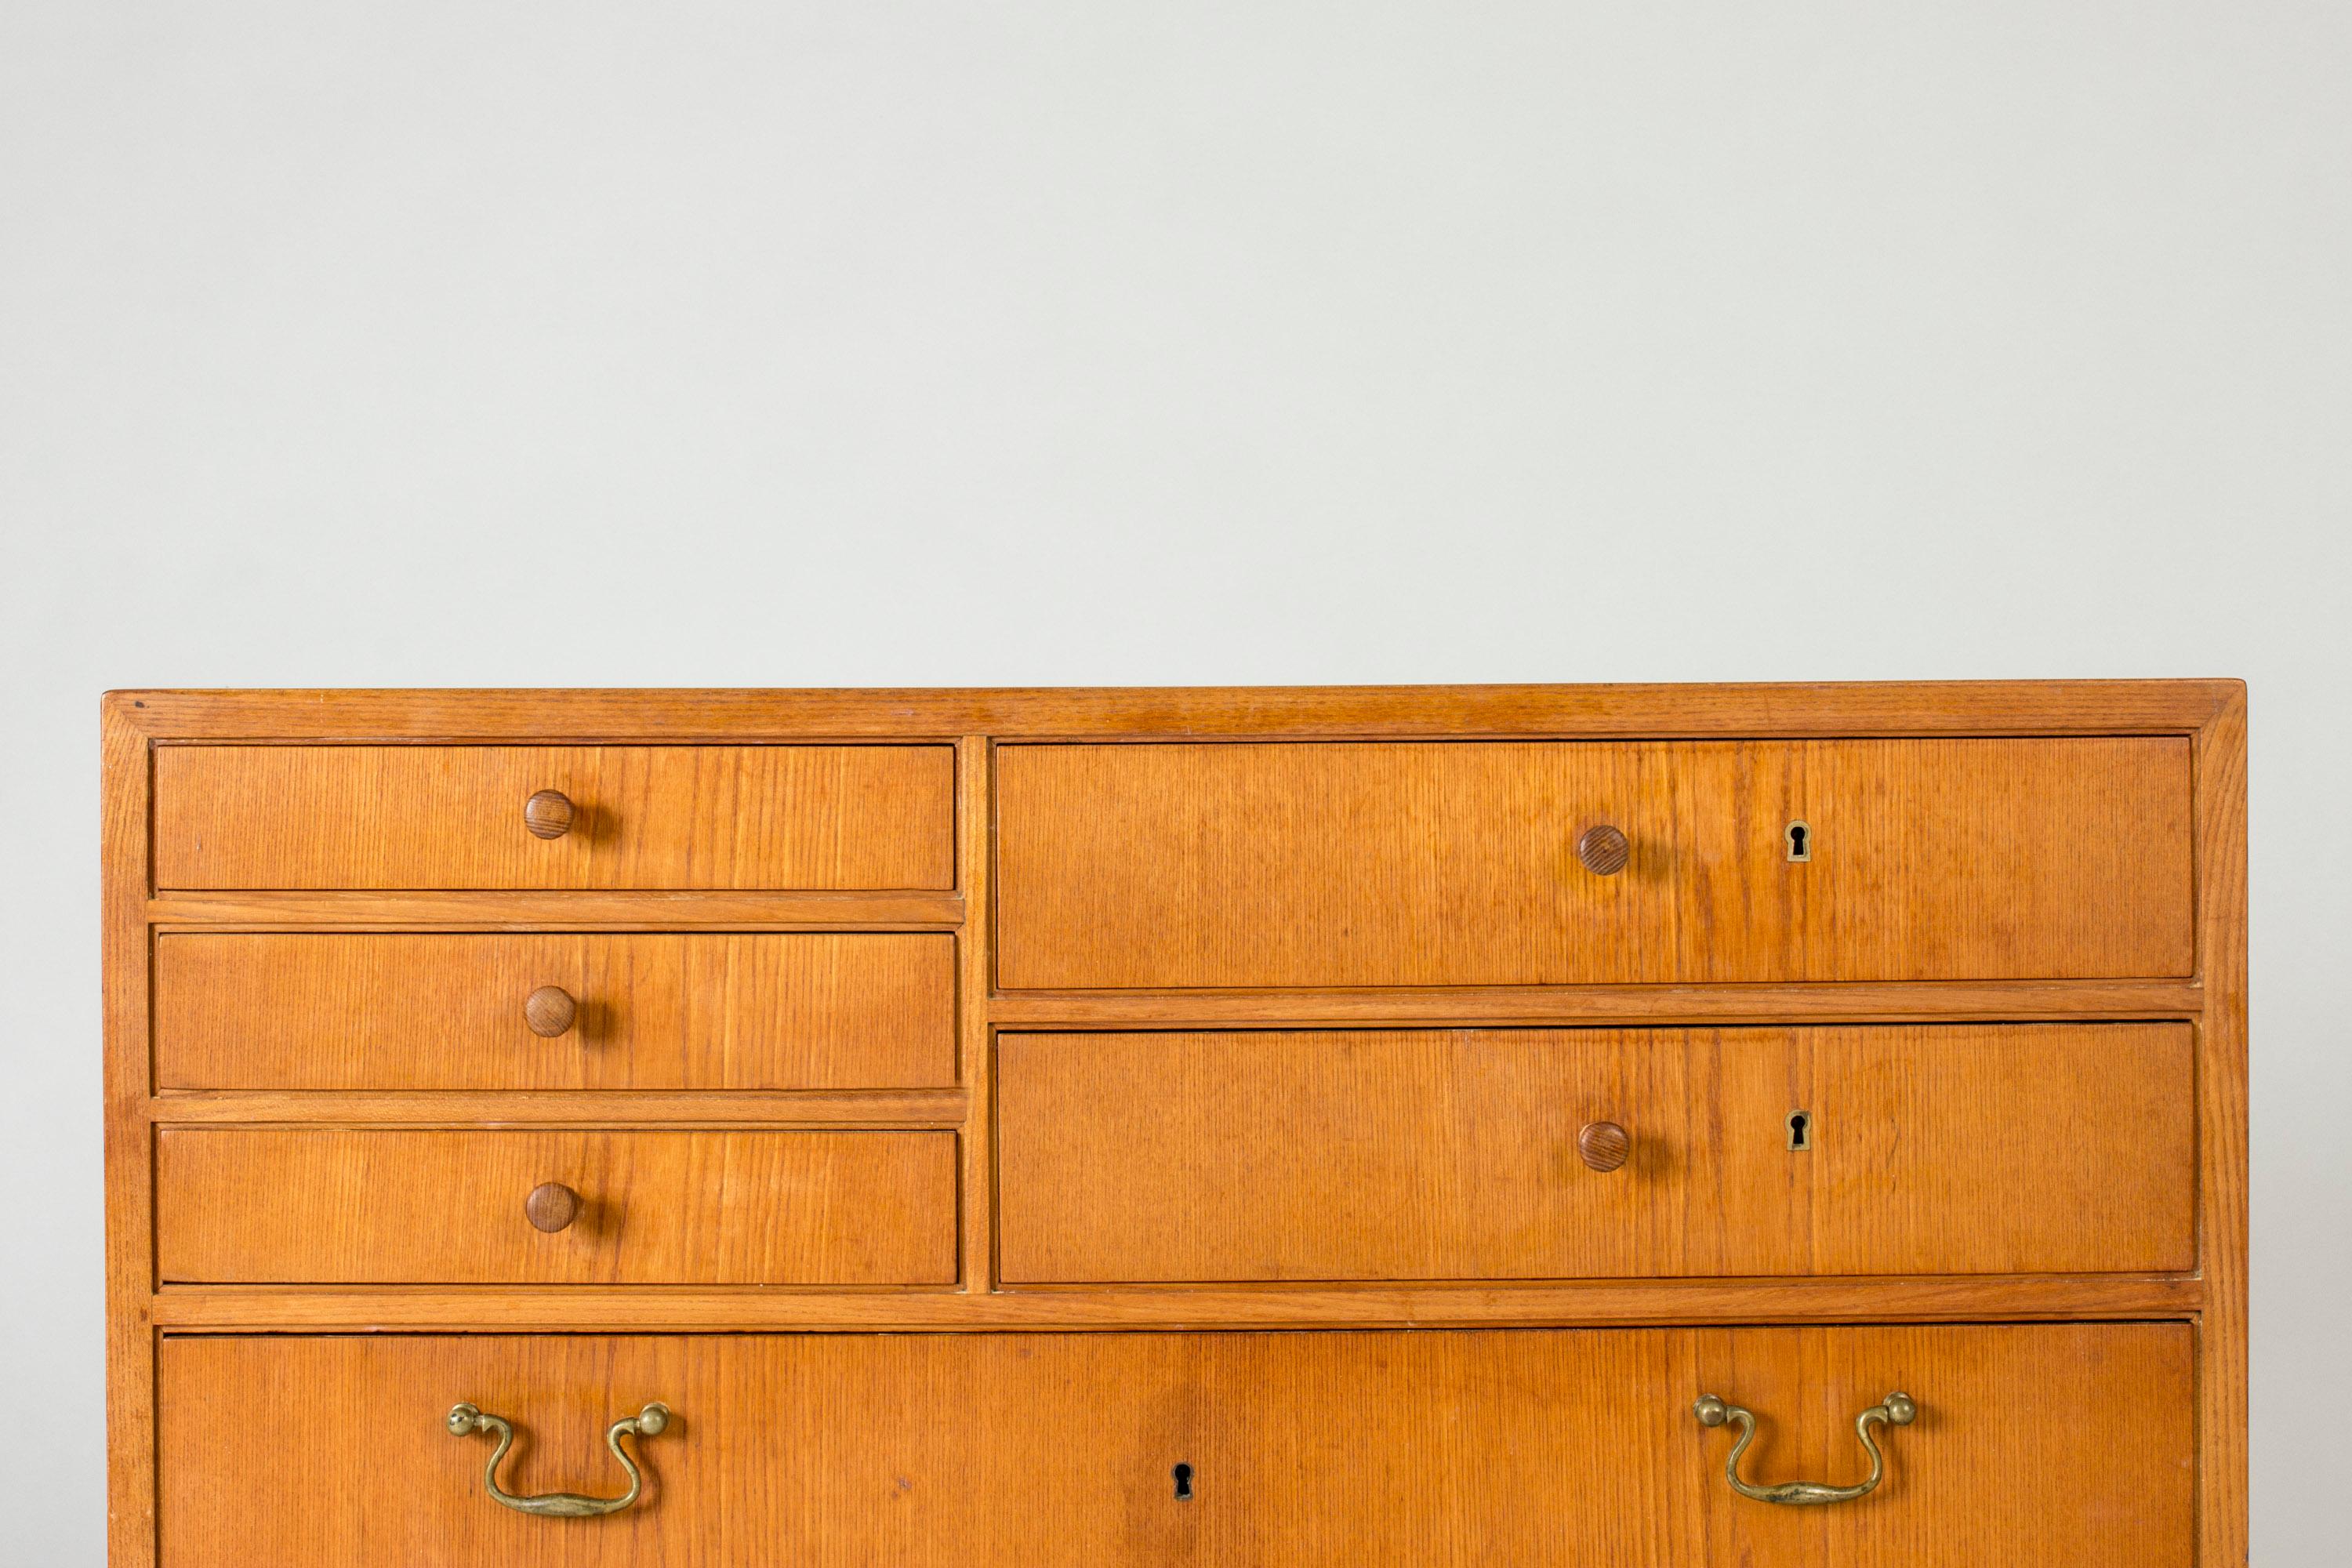 Rare teak chest of drawers by Egon Bro, designed in 1944. Five small drawers at the top and three big ones at the bottom. Nice contrast between the casual knobs on the small drawers and elegant brass ones on the below.
The chest of drawers was